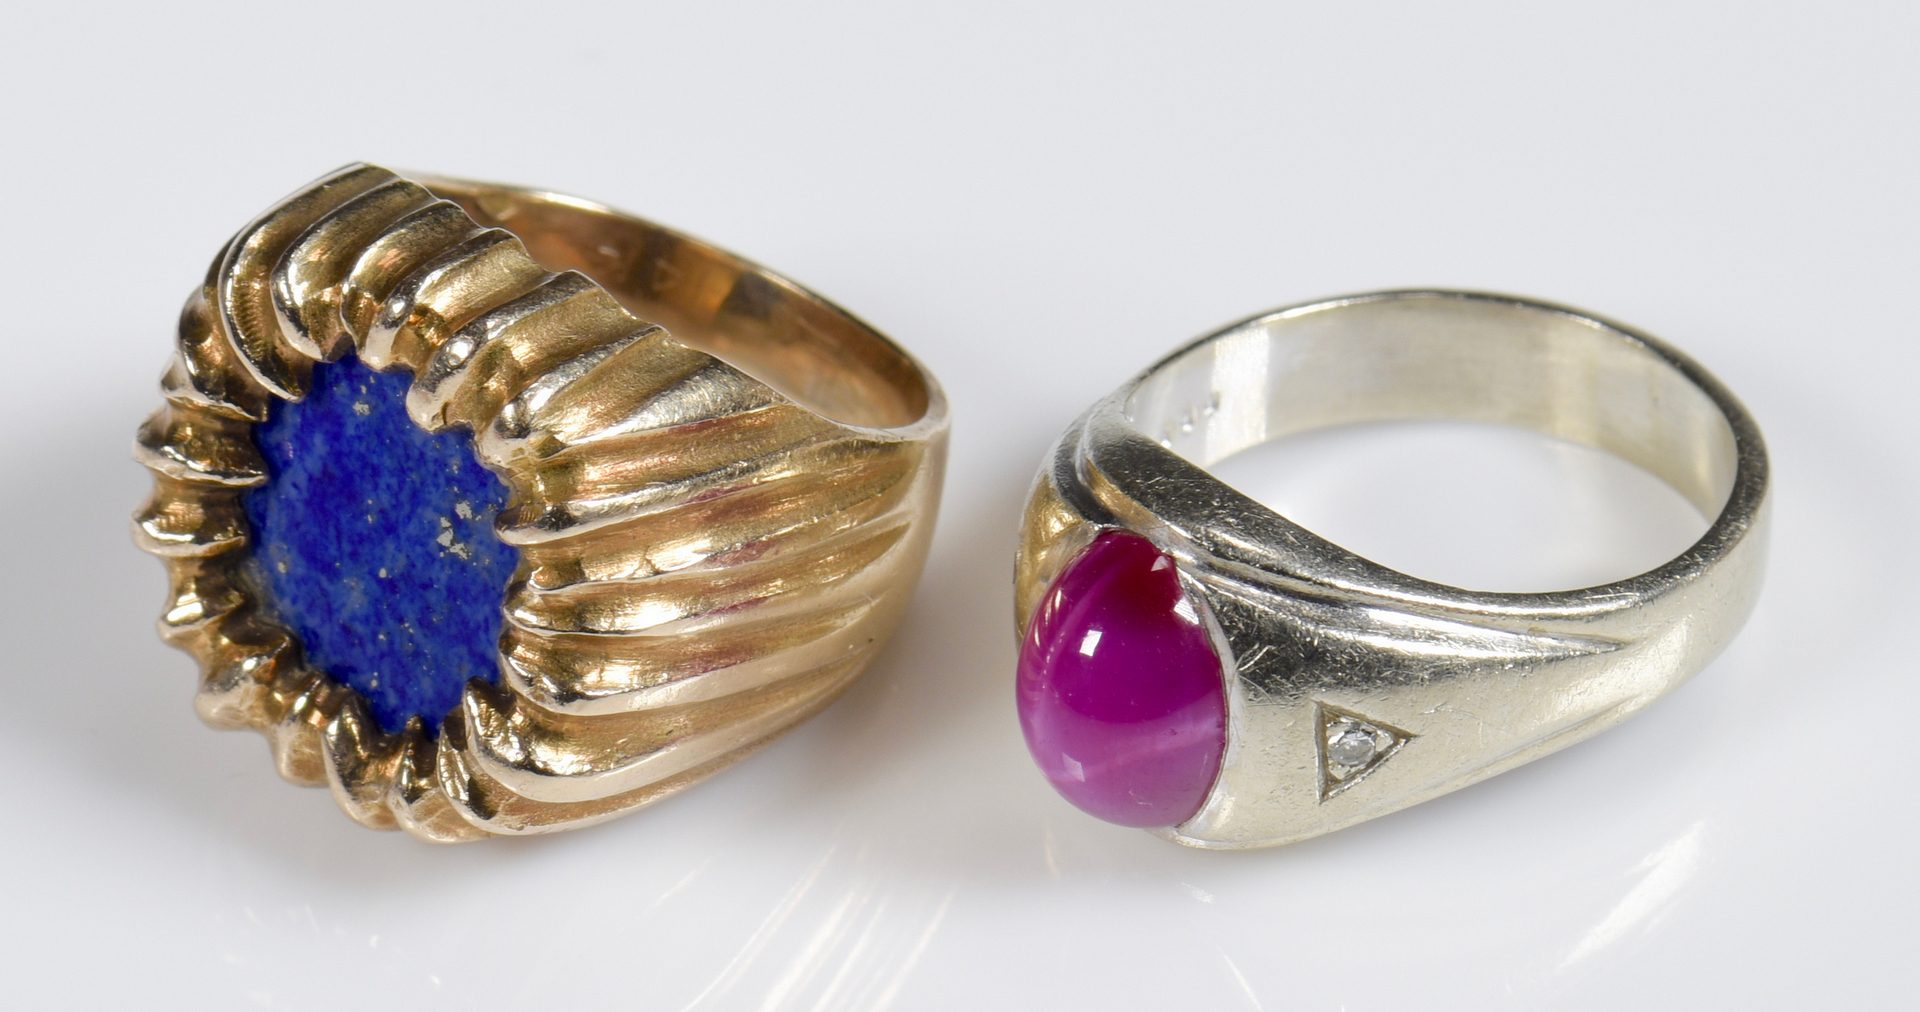 Lot 955: 5 14K and 18K Gent’s Jewelry Items